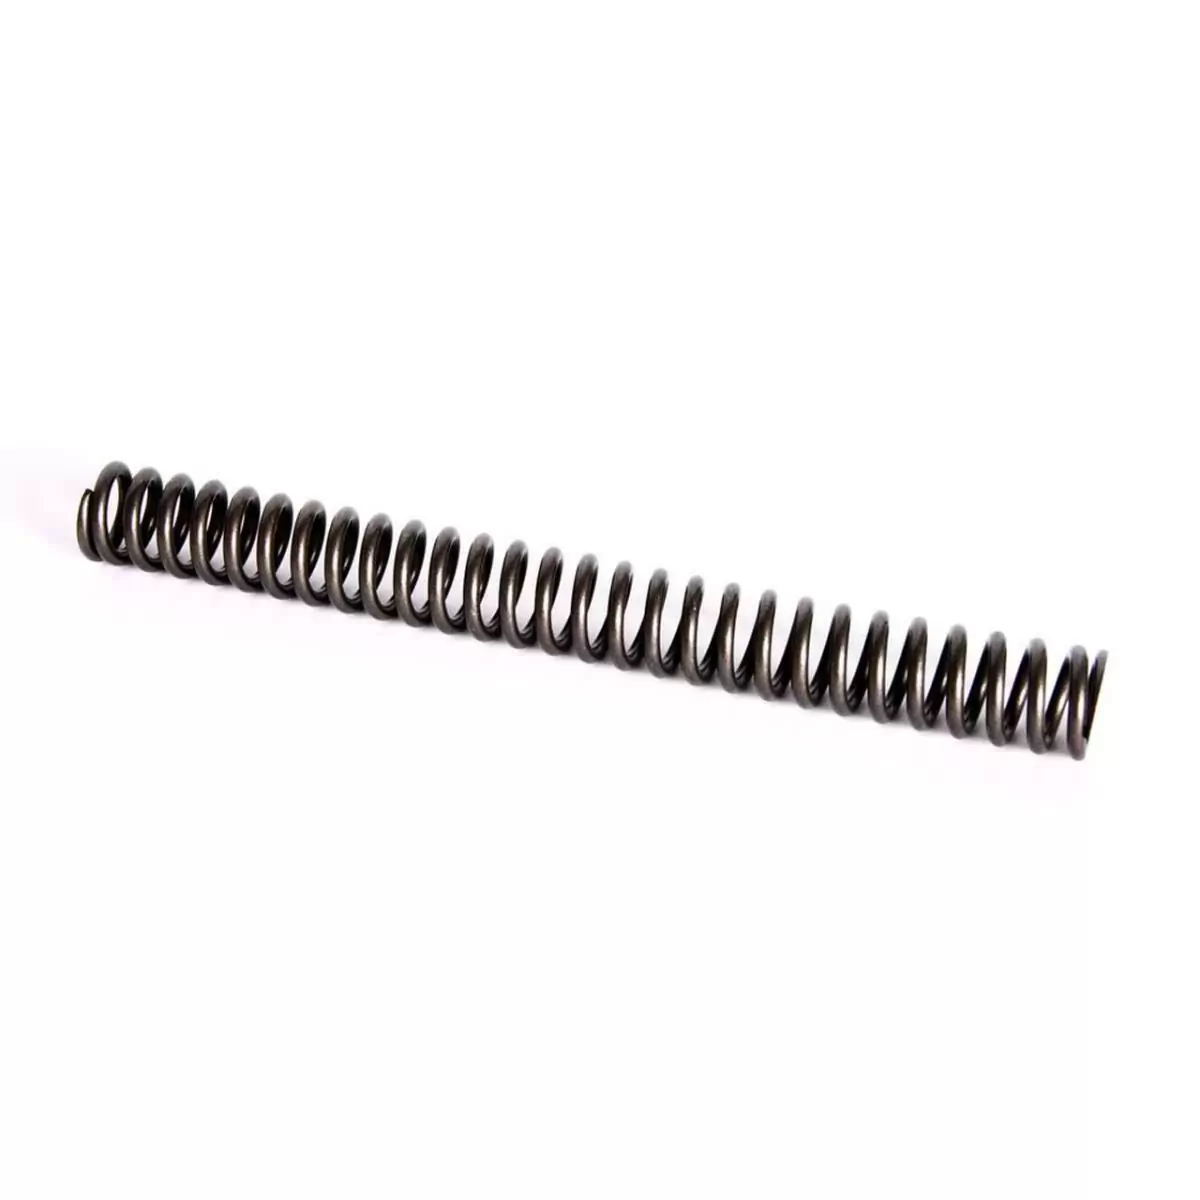 spare spiral spring soft for sf 13-xct-jr-p-20 - image